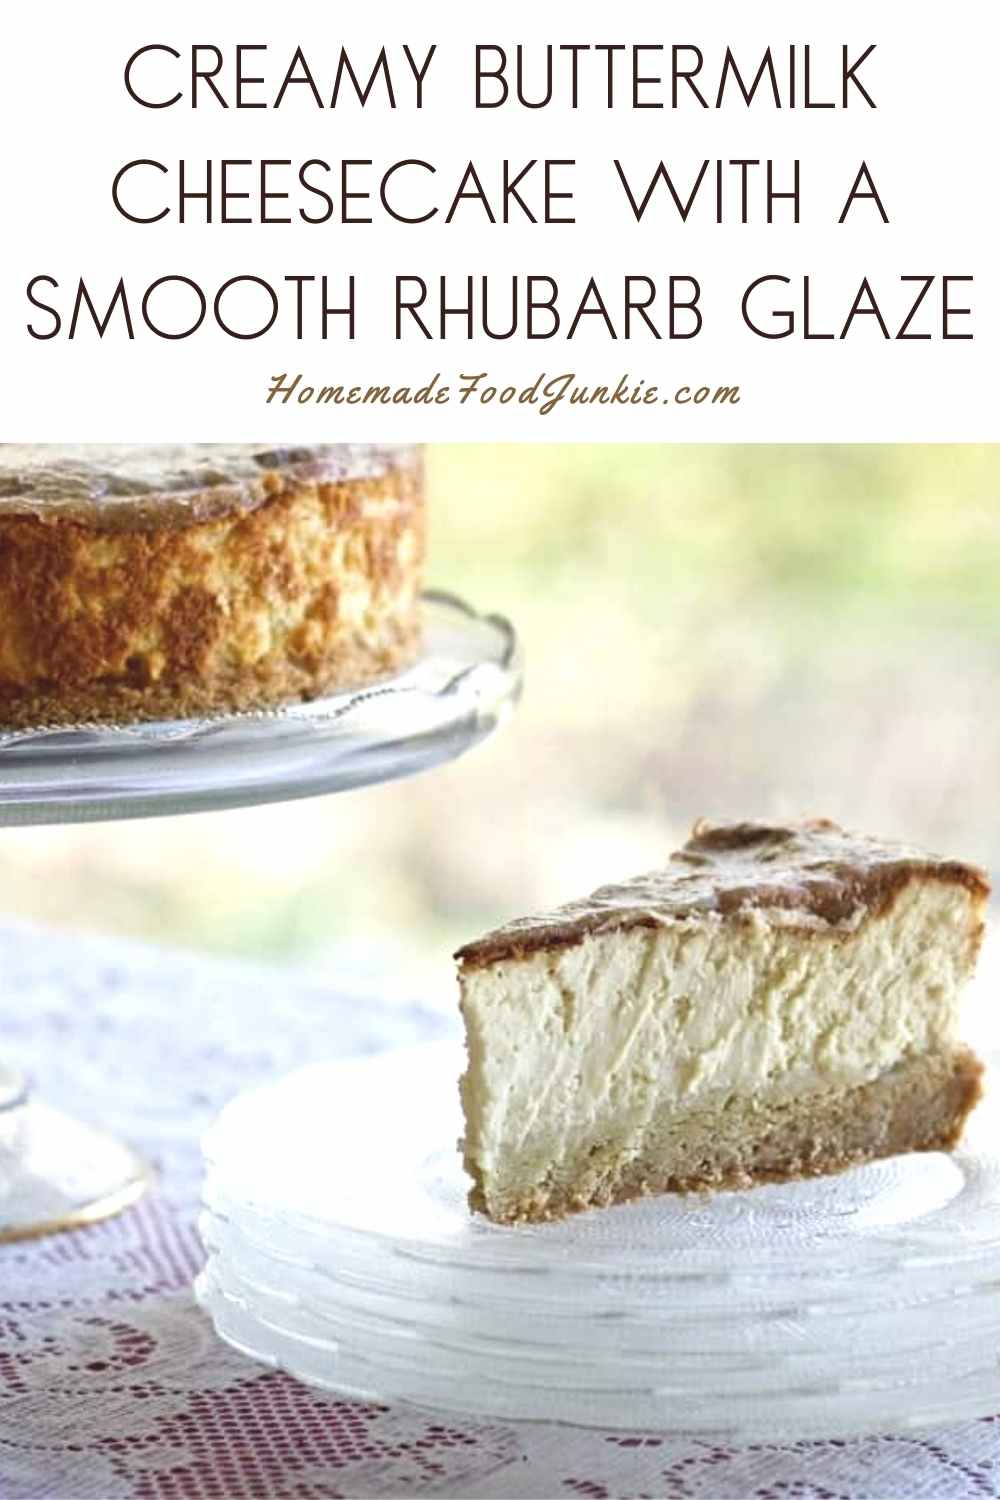 Creamy Buttermilk Cheesecake With A Smooth Rhubarb Glaze-Pin Image